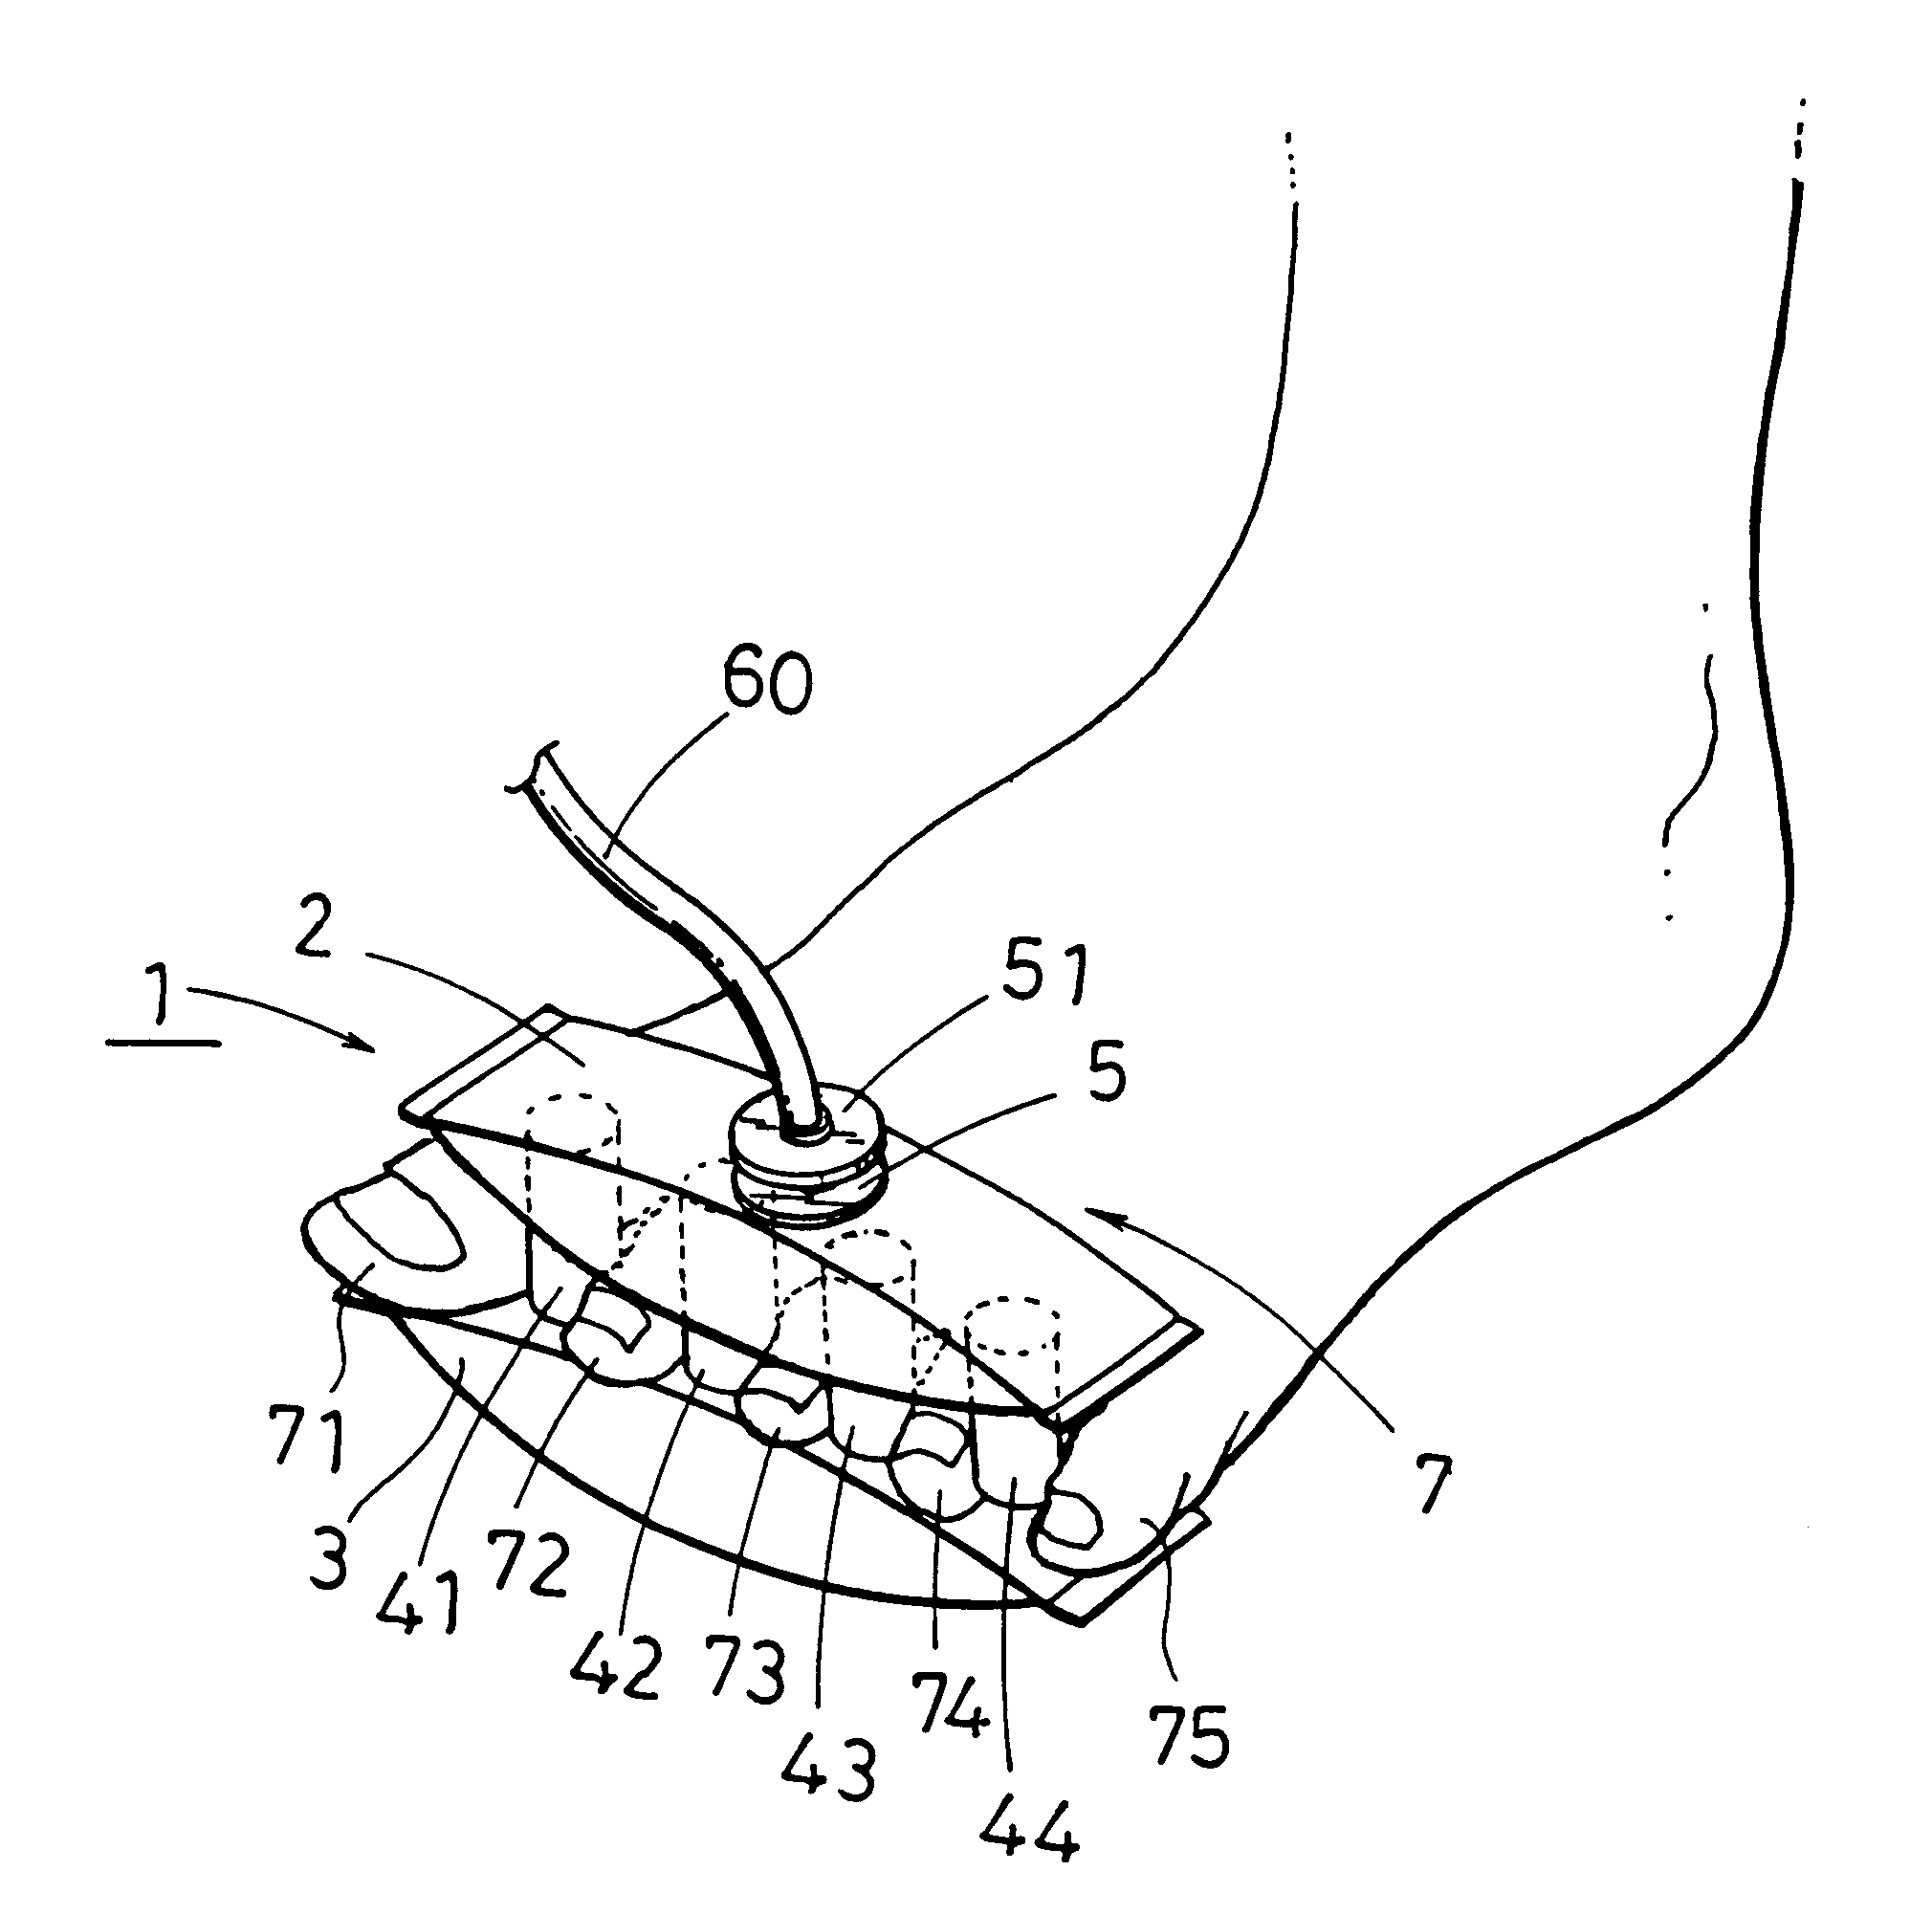 Health appliance including an expandable chamber for stretching the toes